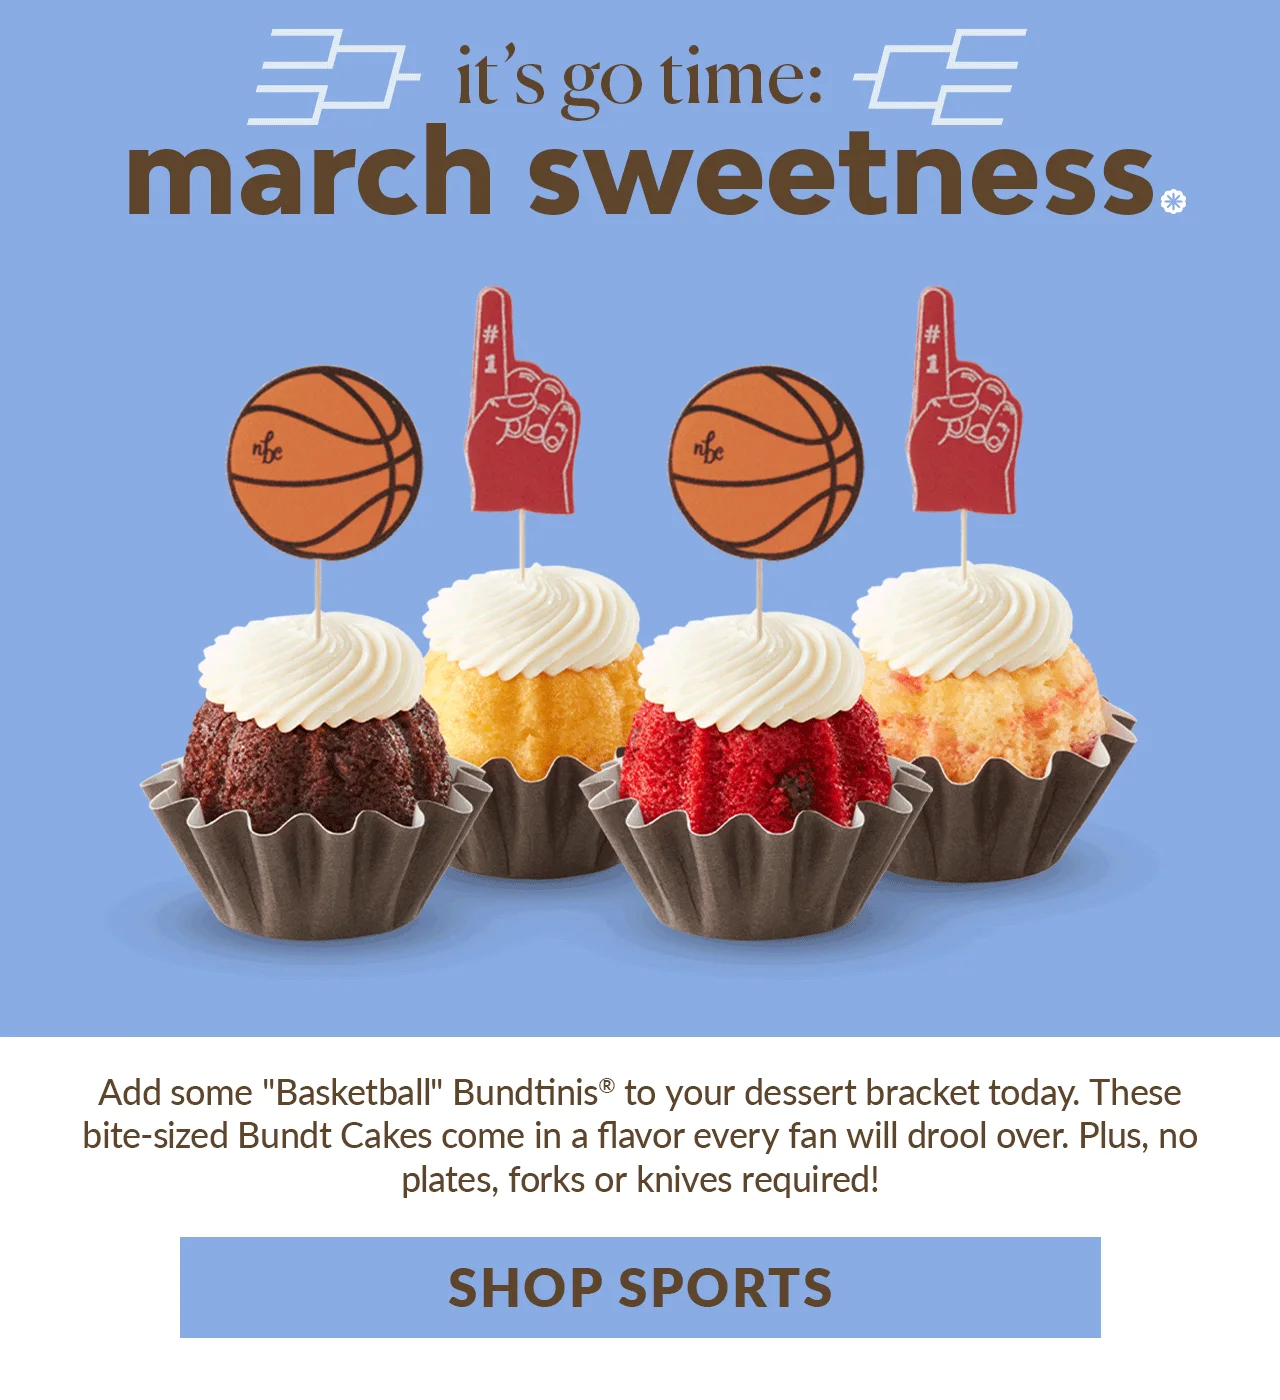 it's go time: march sweetness